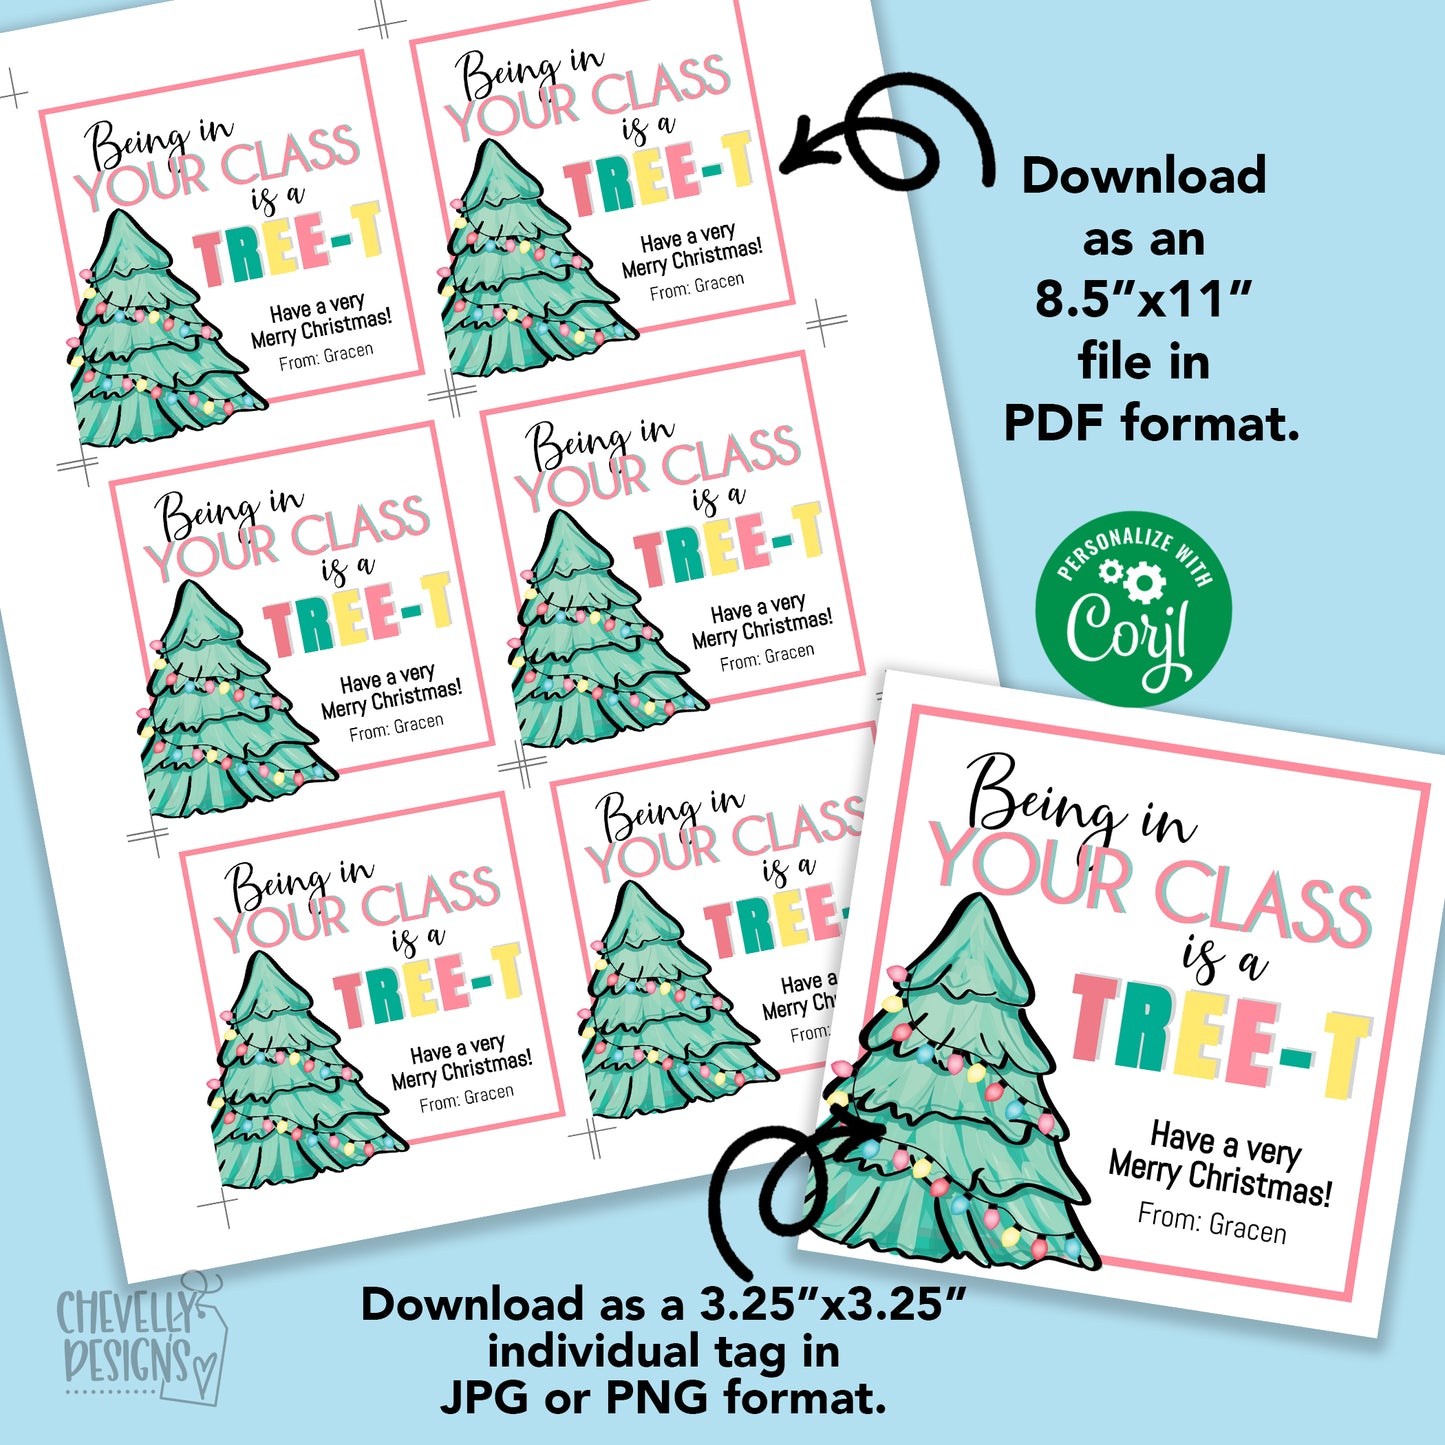 EDITABLE - Your Class is a TREE -t - Christmas Tags for Teacher Gifts - Printable Digital File